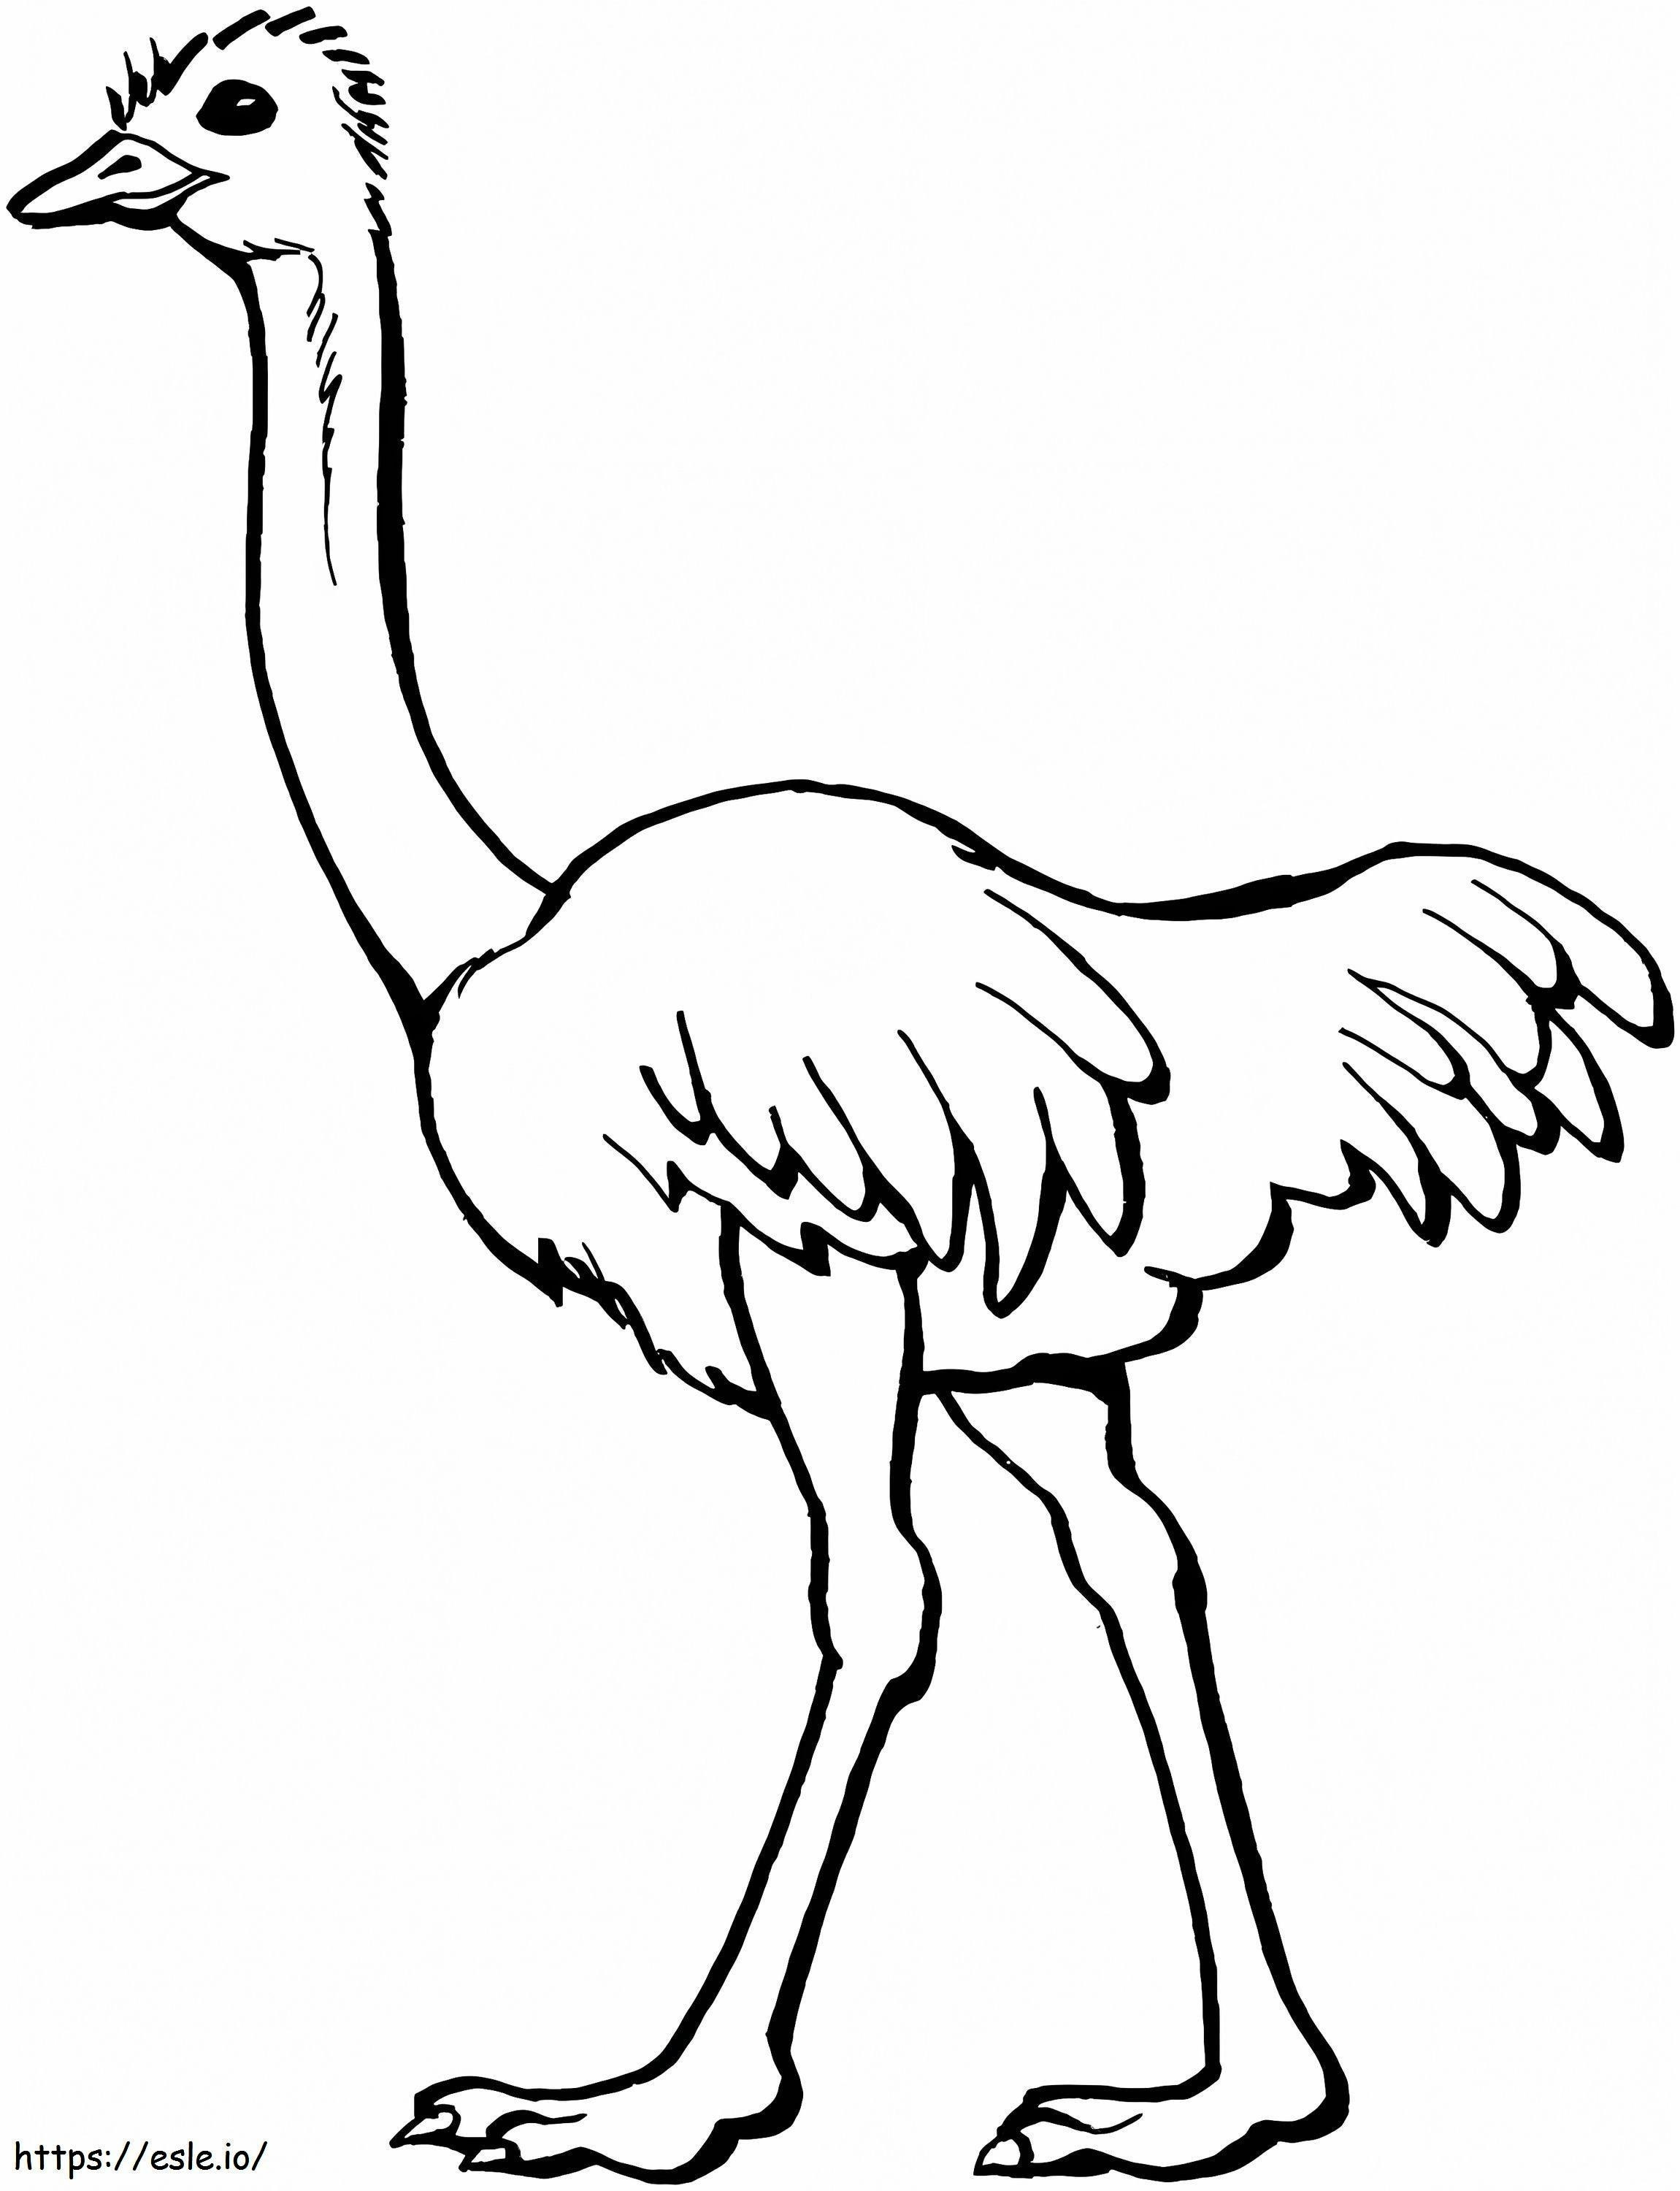 Ostrich 2 coloring page